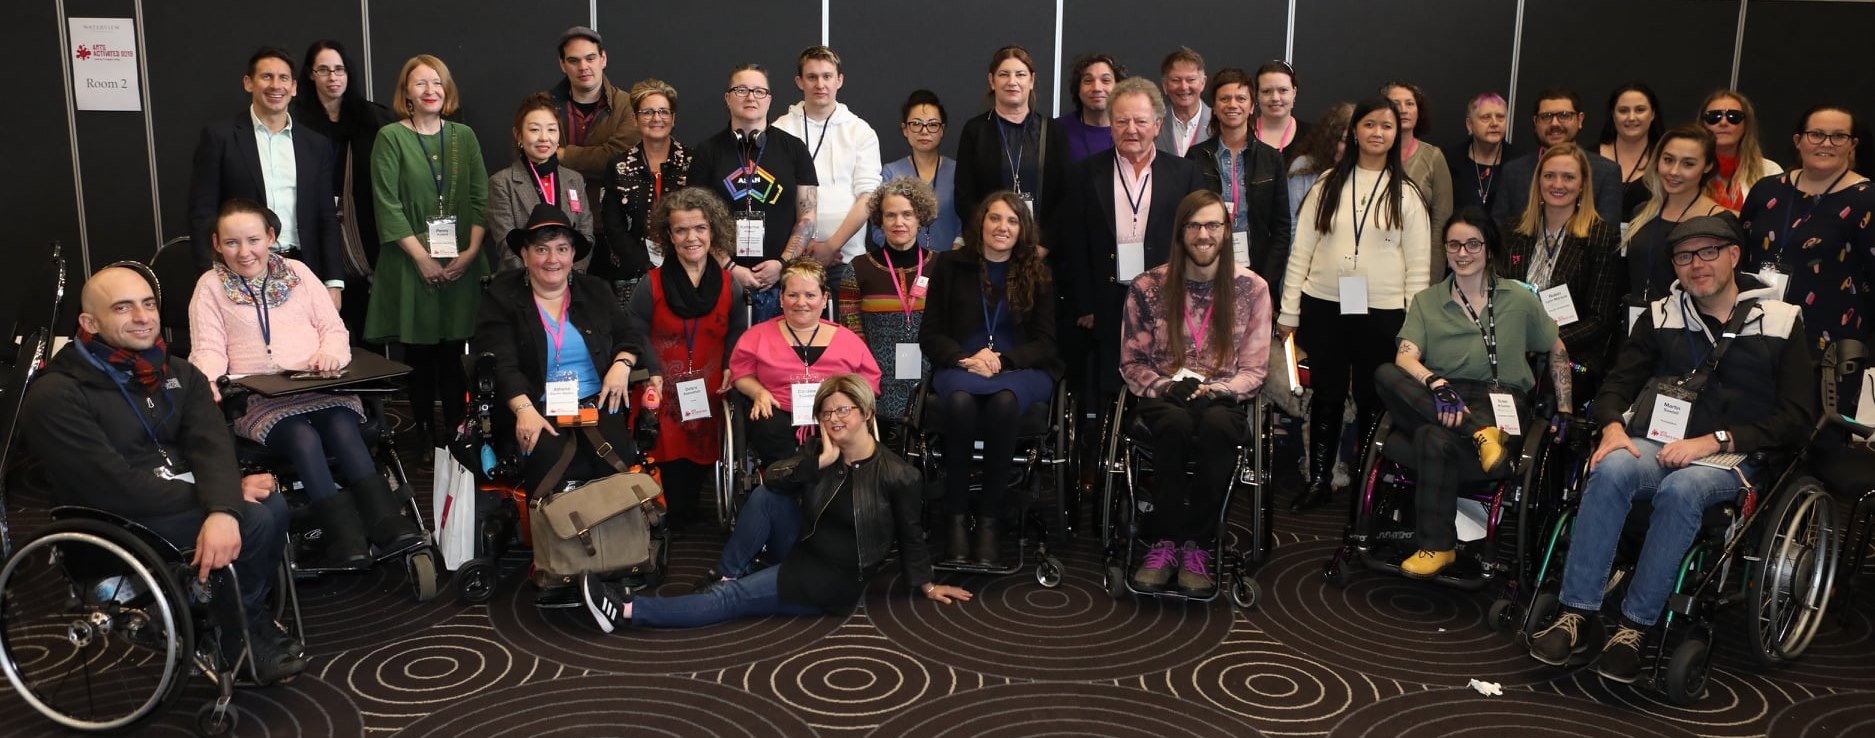 Image is a large group of people sitting on carpet and standing against a wall. Some are in wheelchair, some are in chair, some are standing.